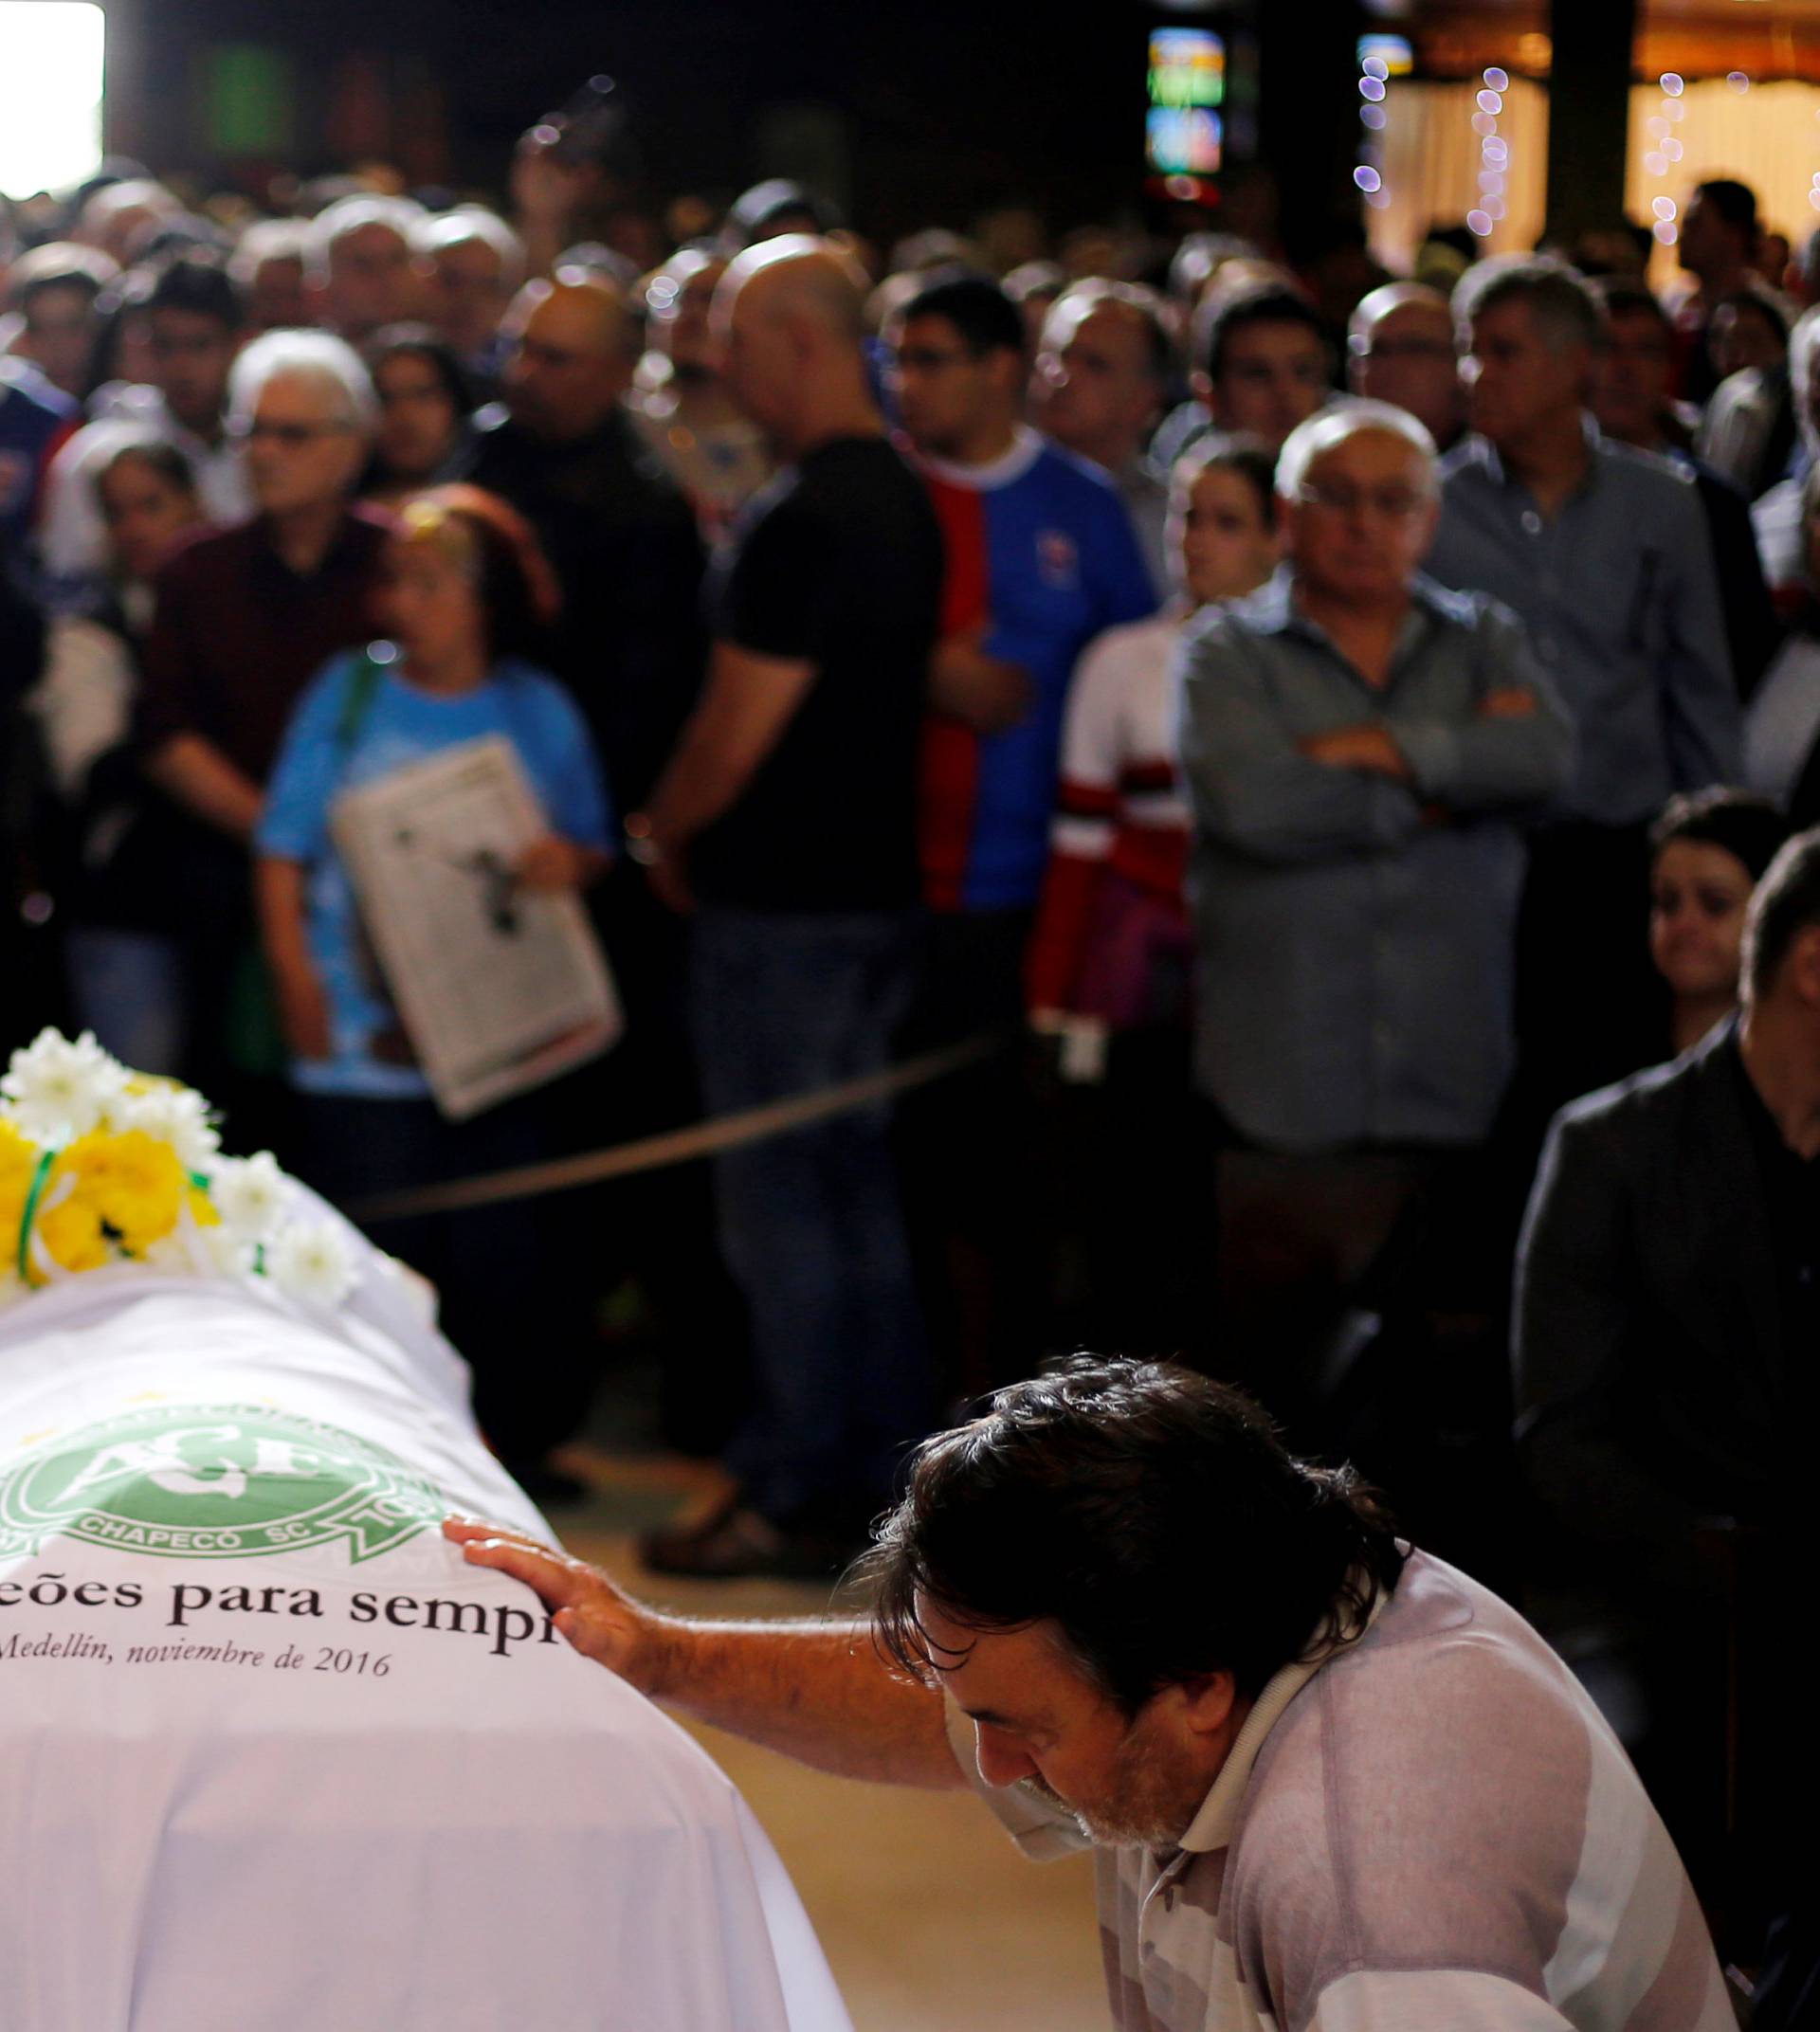 A soccer fan pays tribute next to the coffin of Chapecoense club head coach Caio Junior, who died in the plane crash in Colombia, during a ceremony in Curitiba